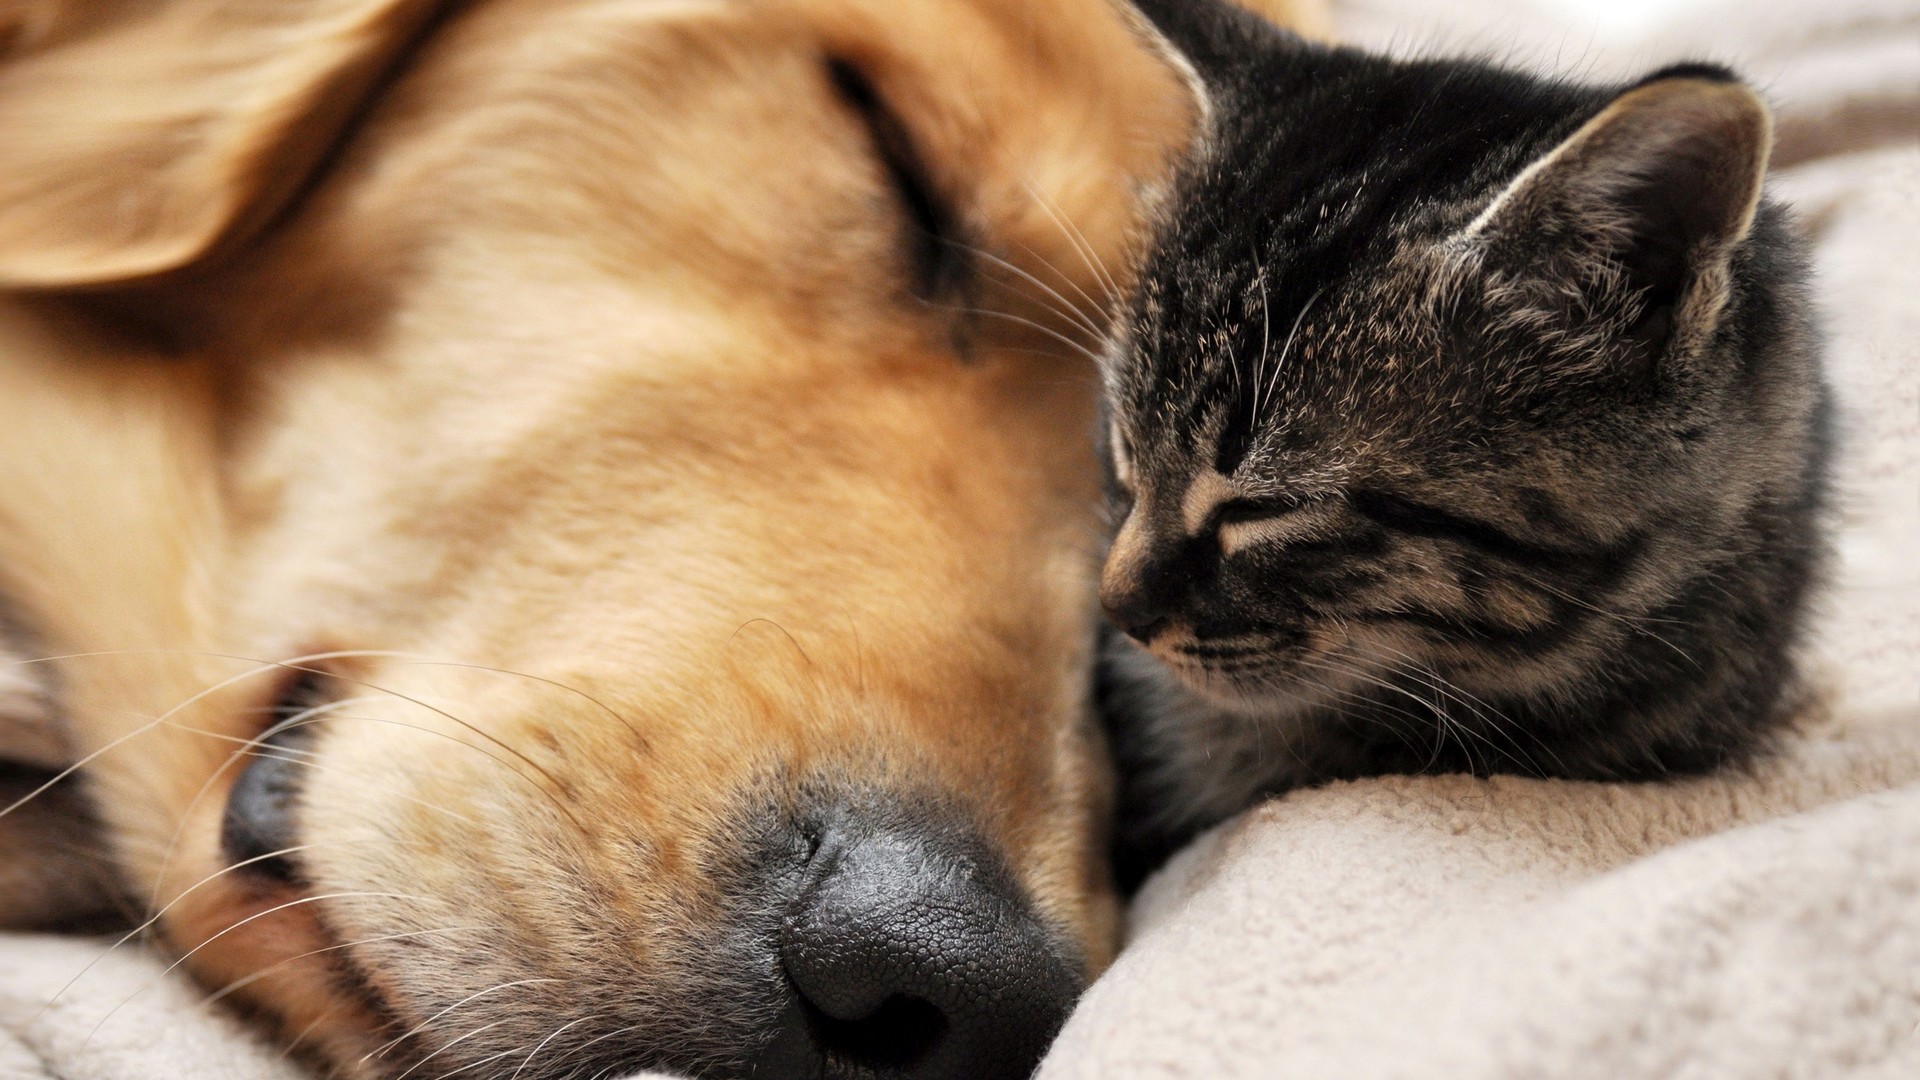 1920x1080 Cat and dog napping together Widescreen Wallpaper 8982 